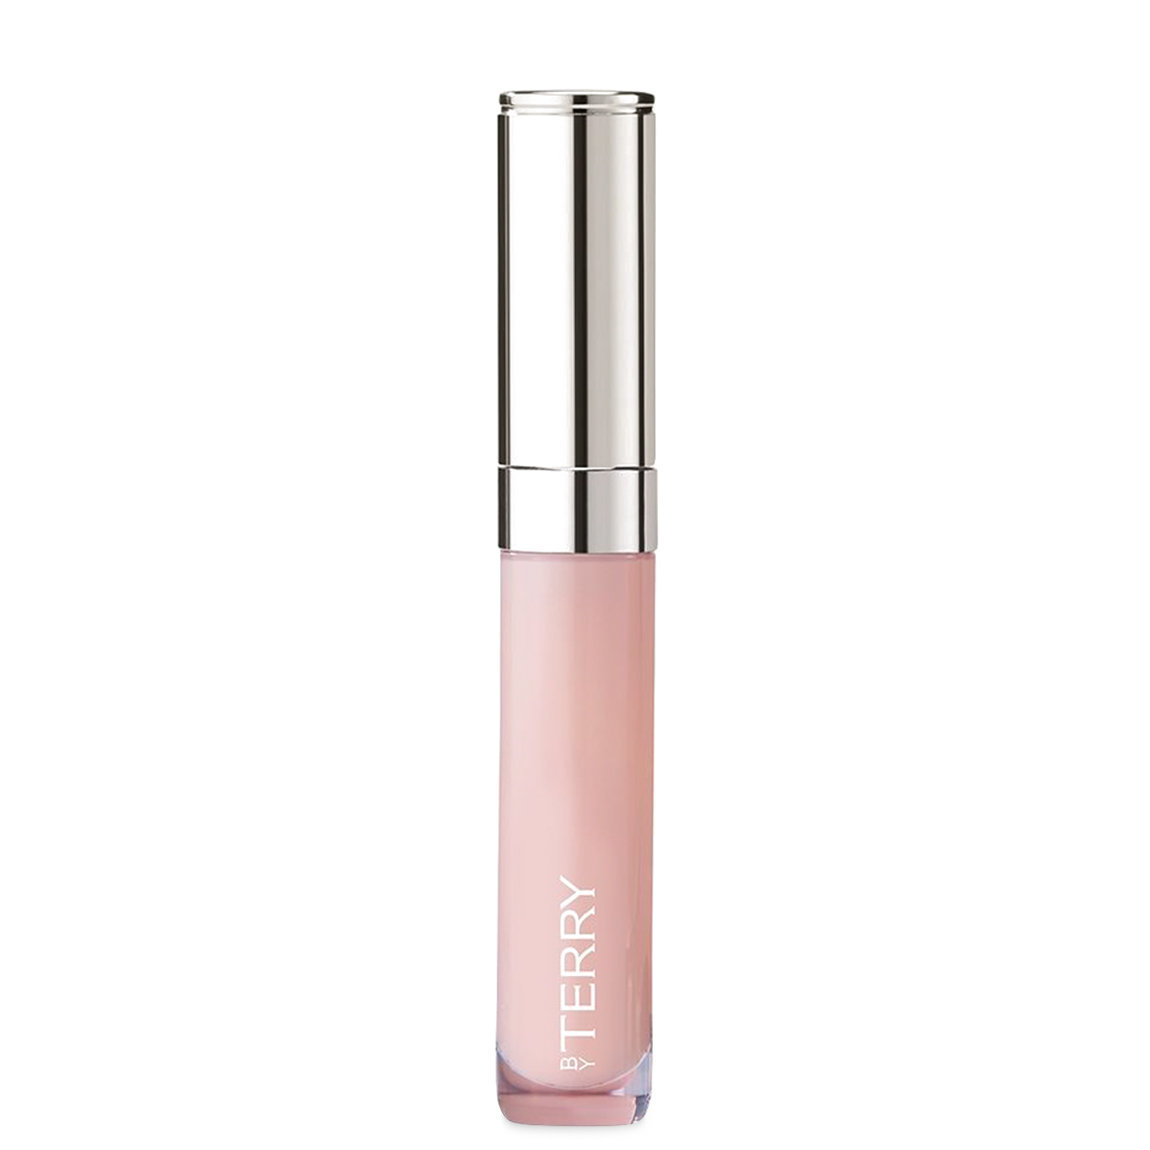 BY TERRY Baume de Rose Crystalline Bottle alternative view 1 - product swatch.